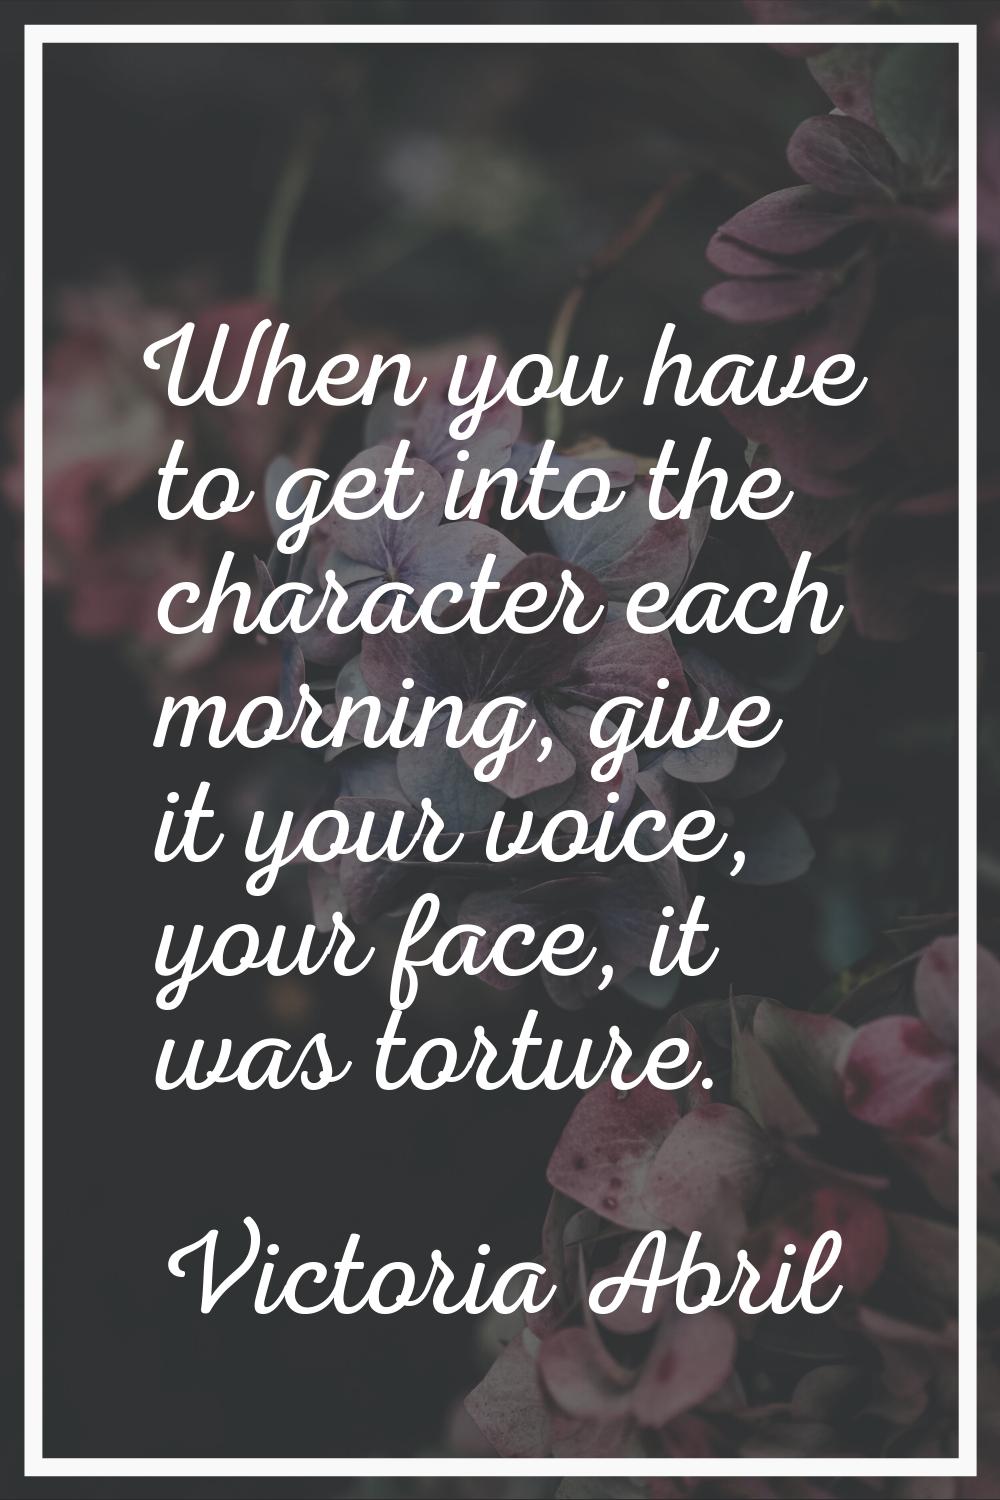 When you have to get into the character each morning, give it your voice, your face, it was torture